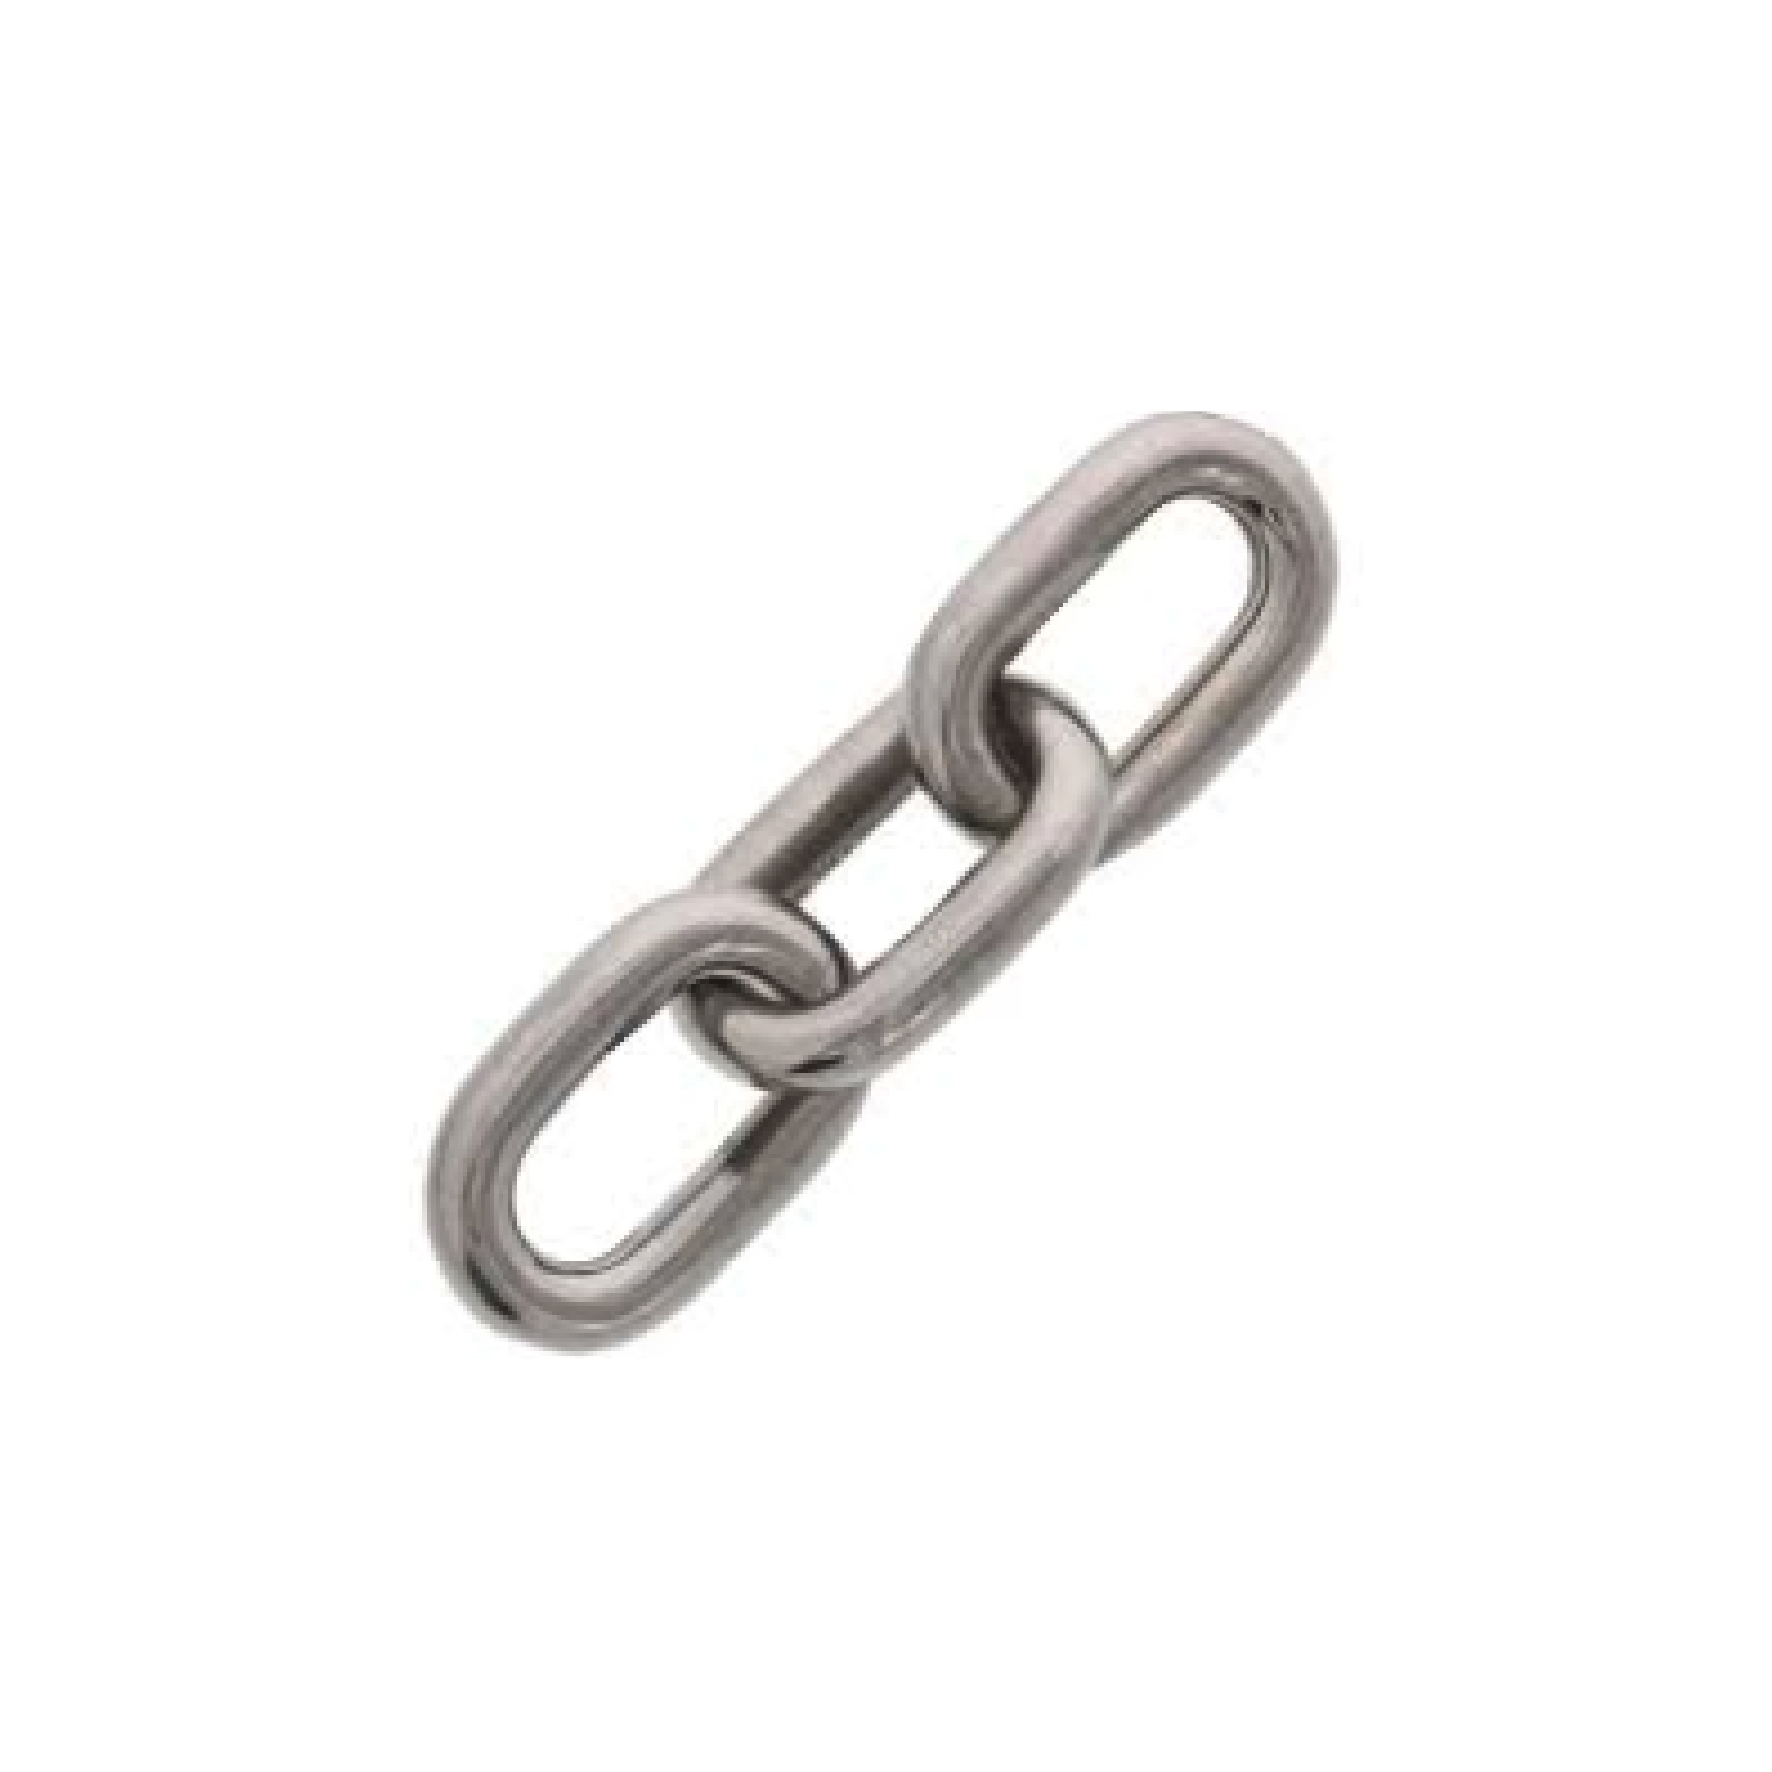 Heavy Duty Chain (Black And Galvanised) 2